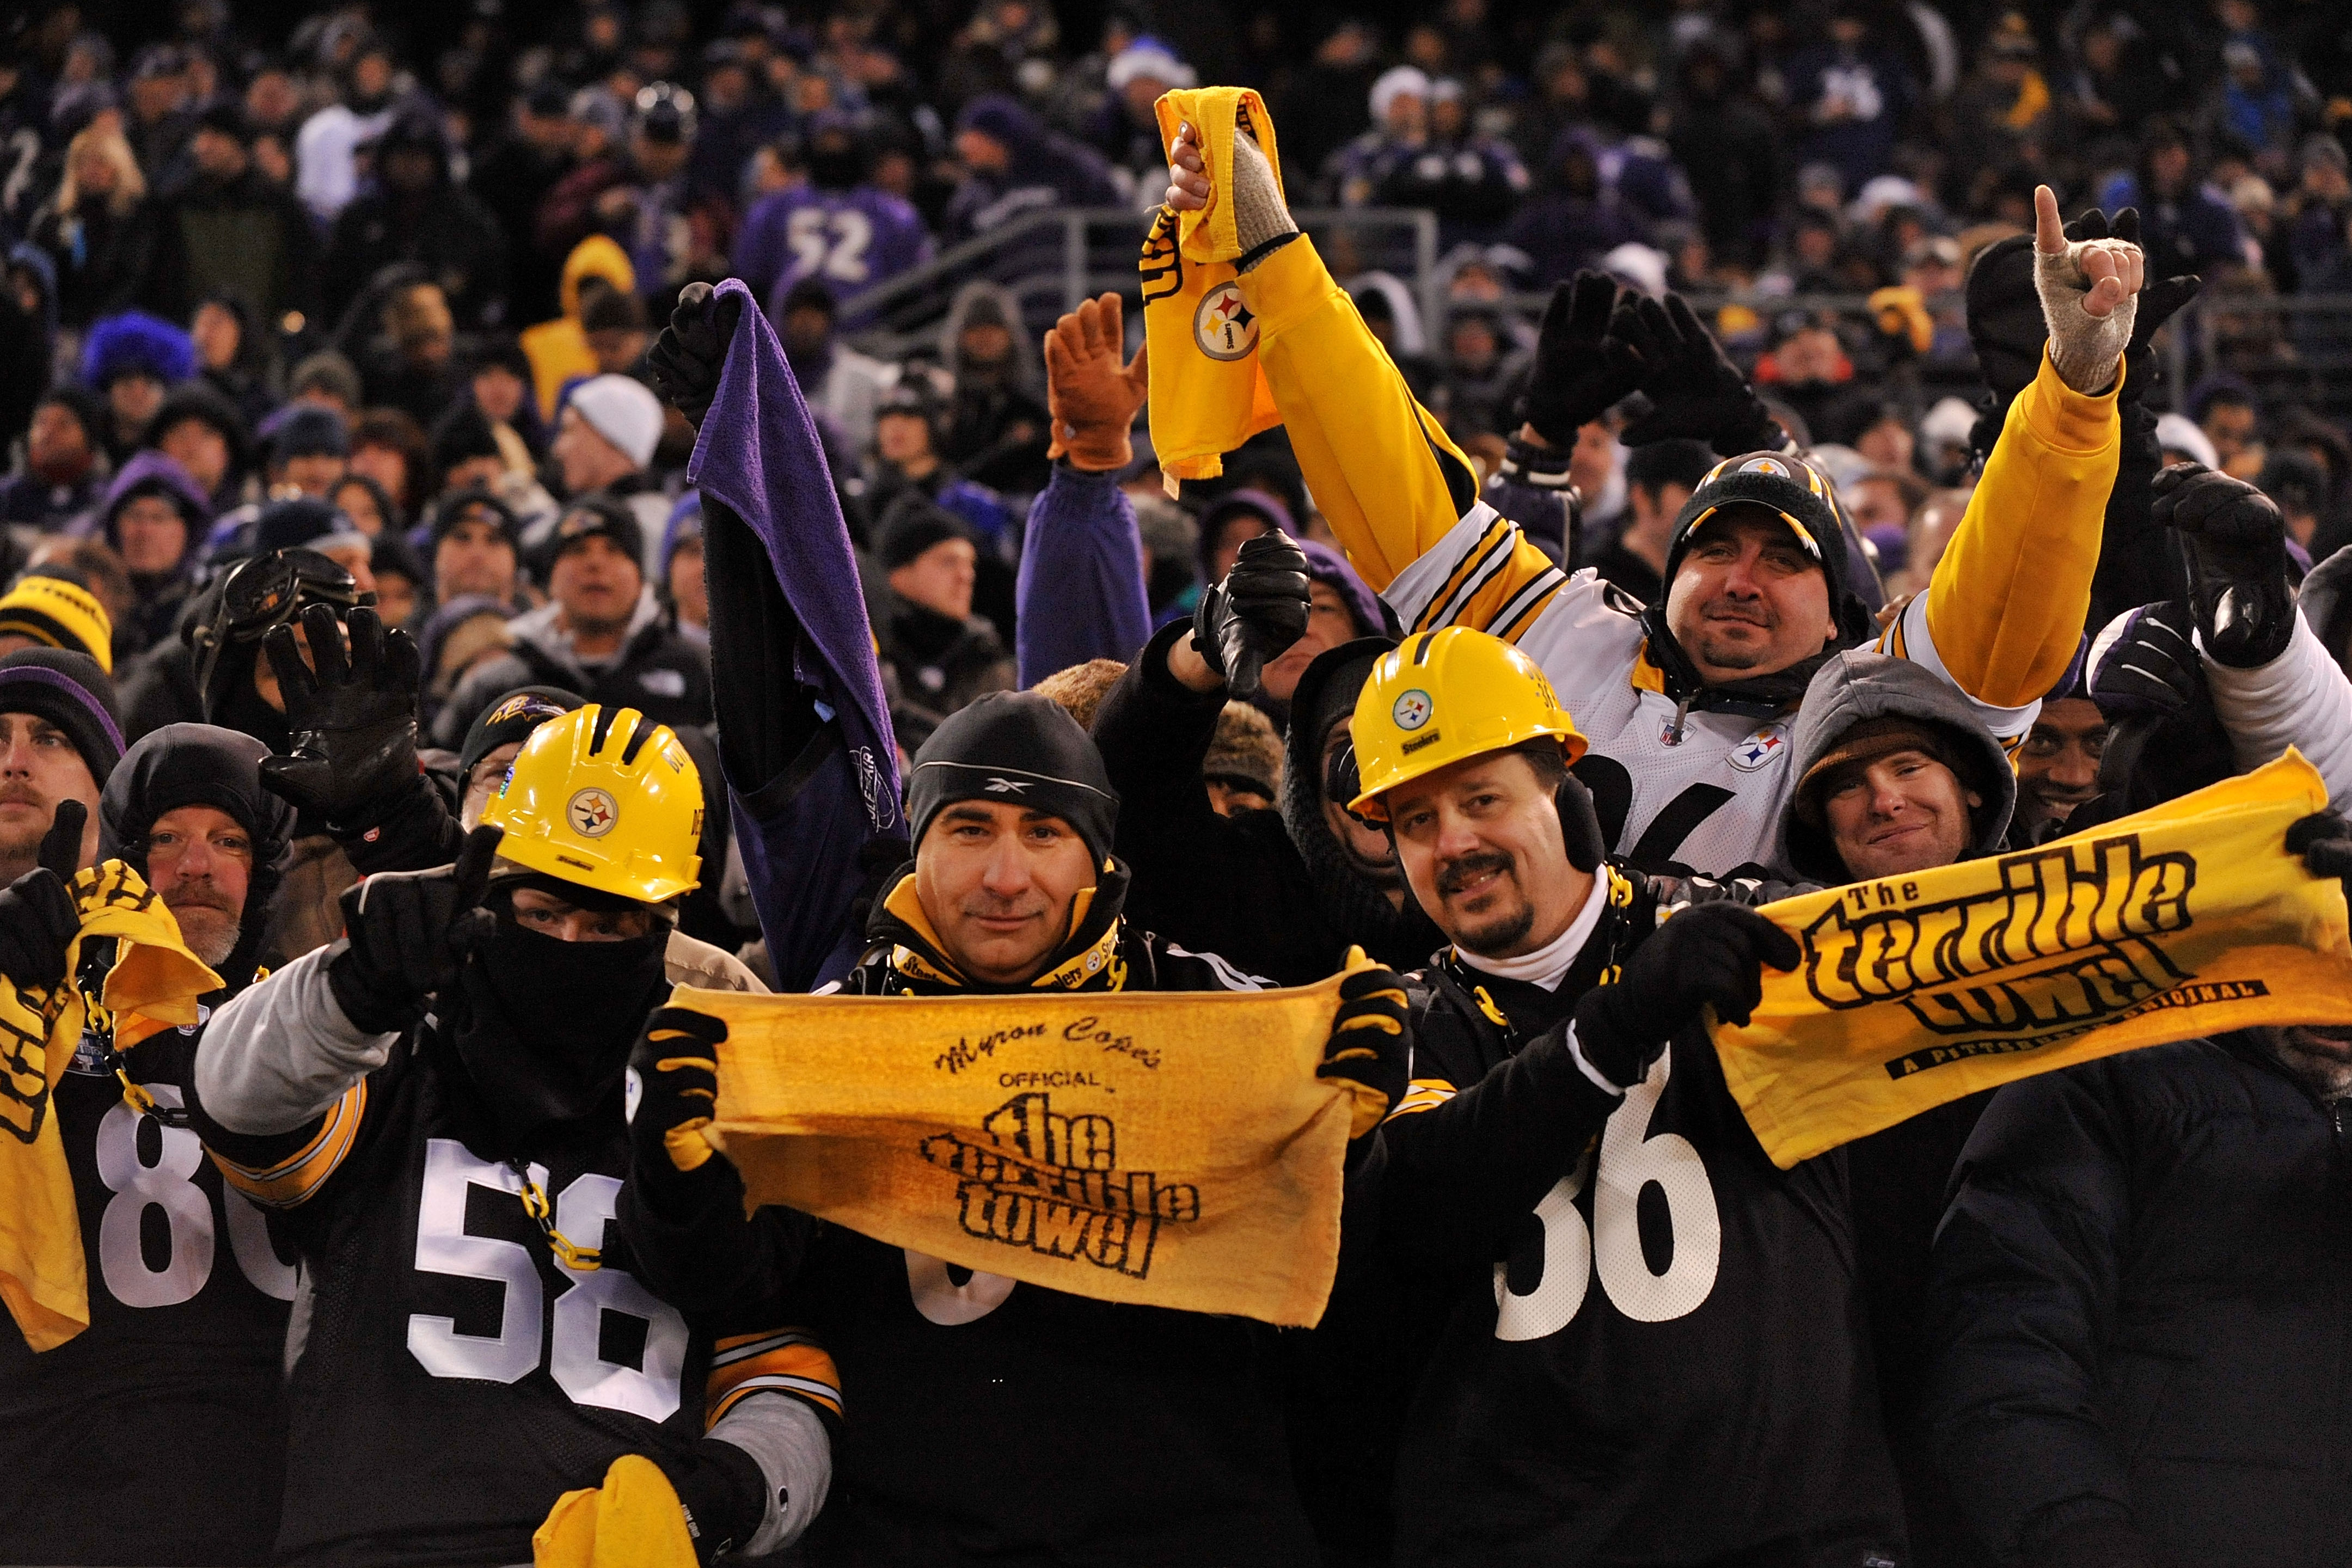 BALTIMORE, MD - DECEMBER 05:  Fans of the the Pittsburgh Steelers cheer during the game against the Baltimore Ravens at M&T Bank Stadium on December 5, 2010 in Baltimore, Maryland. Pittsburgh won 13-10.  (Photo by Larry French/Getty Images)